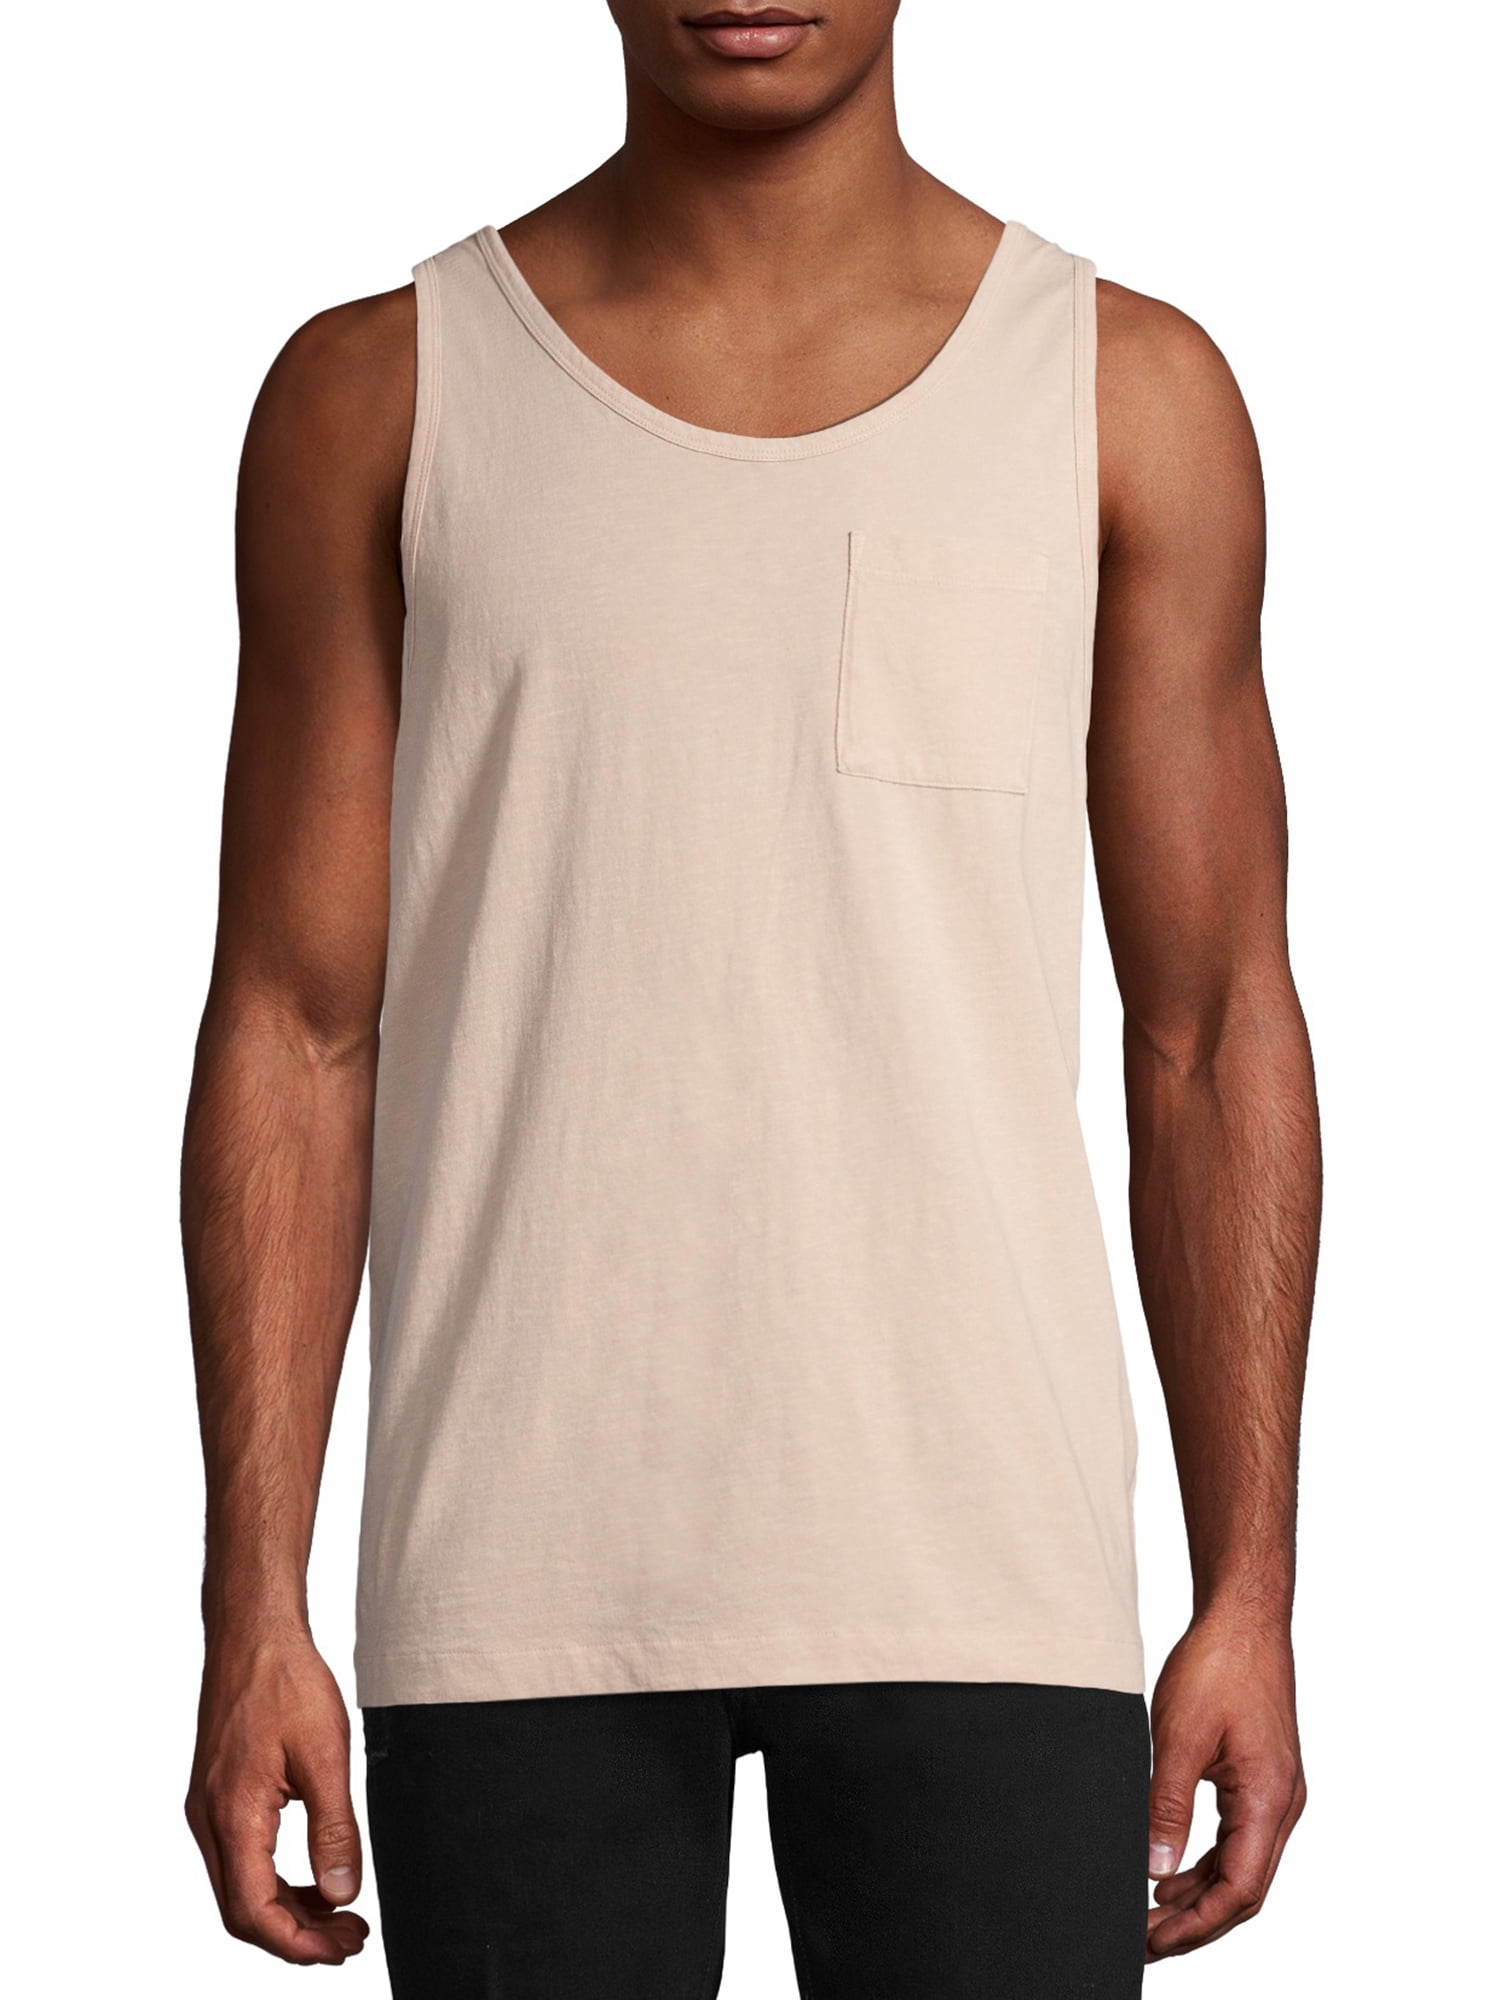 Ok But First Coffee Tanks Top Sleeveless Shirt Fit Men Casual 